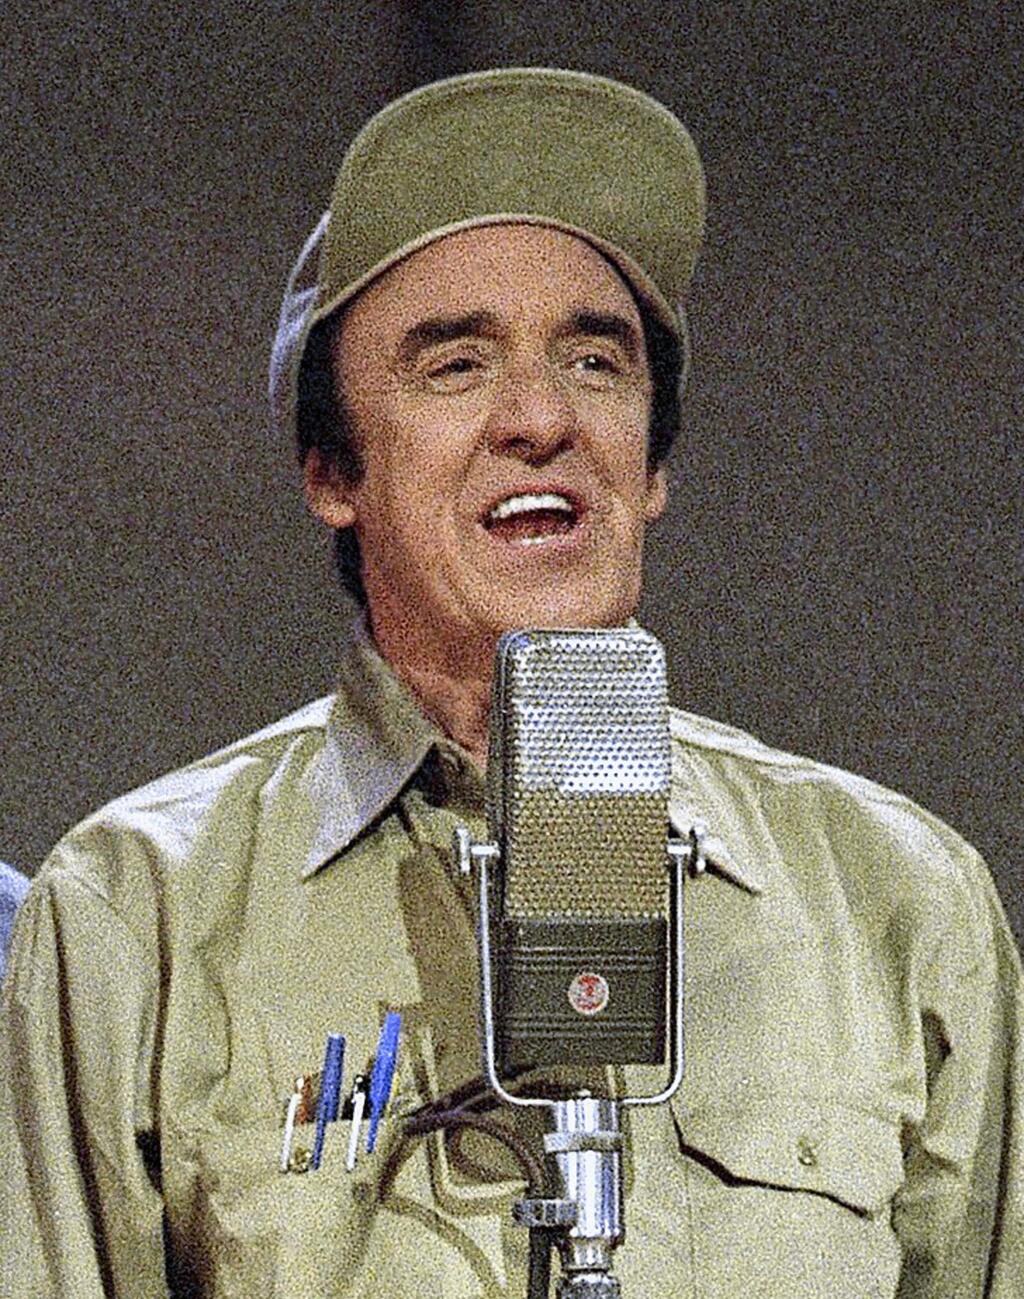 FILE - In this May 7, 1992 file photo, Jim Nabors, a cast member from 'The Andy Griffith Show,' appears in Nashville, Tenn. Nabors died peacefully at his home in Honolulu on Thursday, Nov. 30, 2017, with his husband Stan Cadwallader at his side. He was 87. (AP Photo, File)